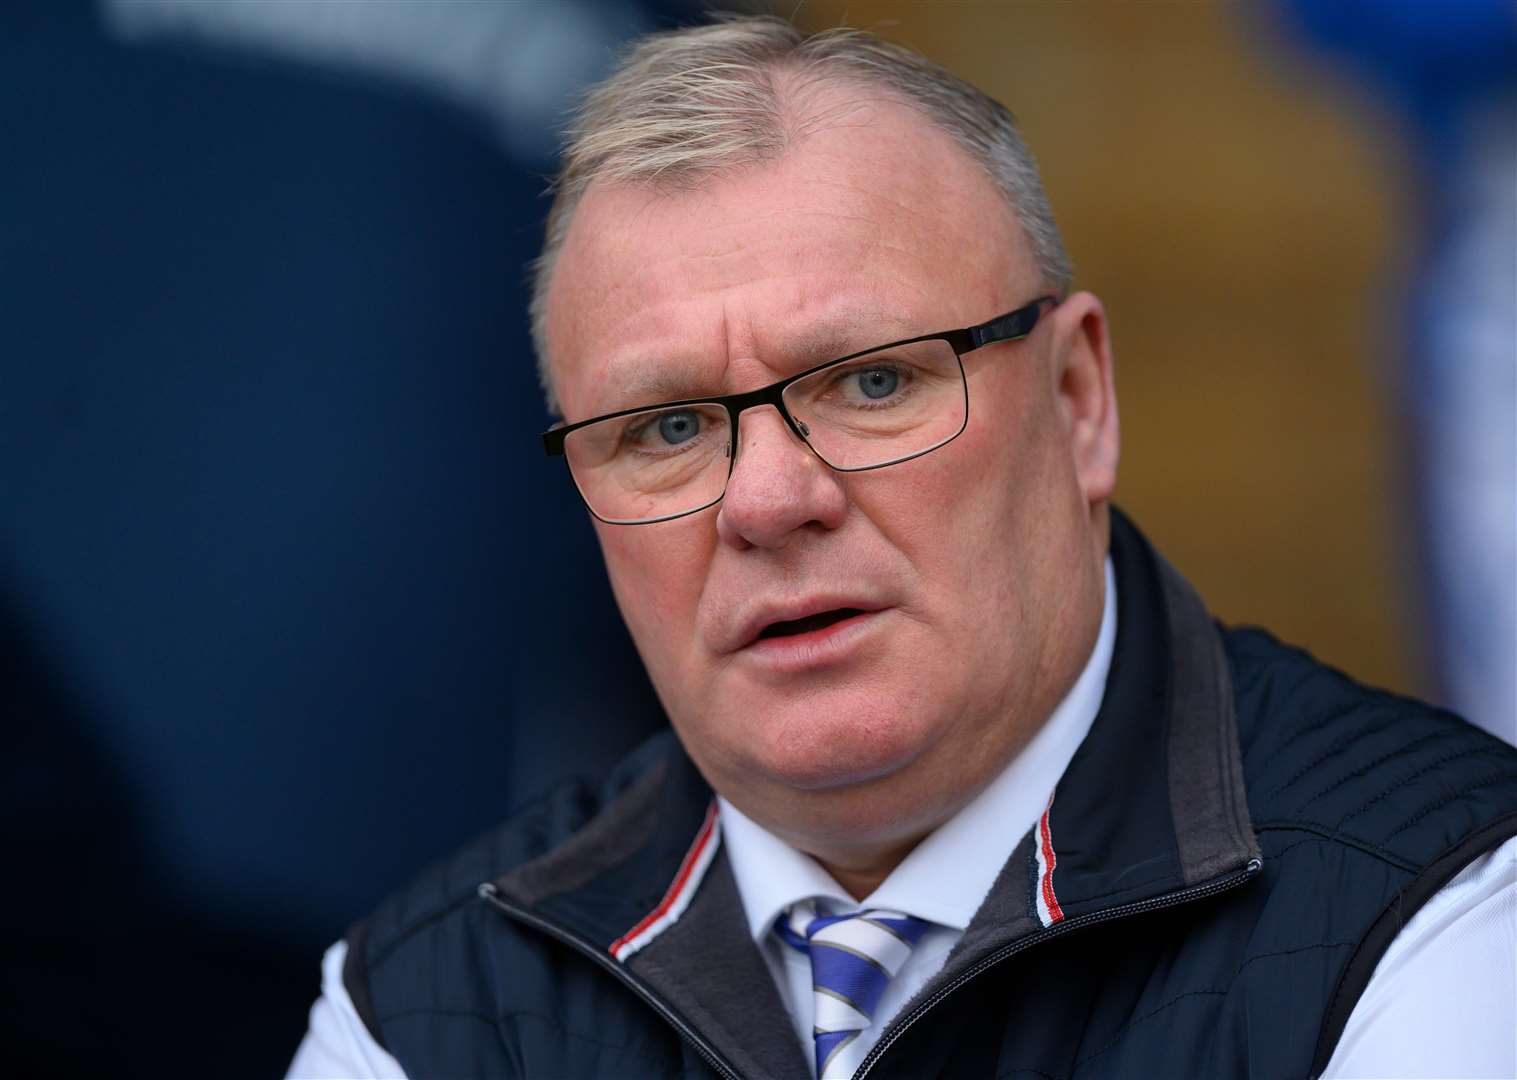 Steve Evans' side were unable to convert any of their late chances against Burton